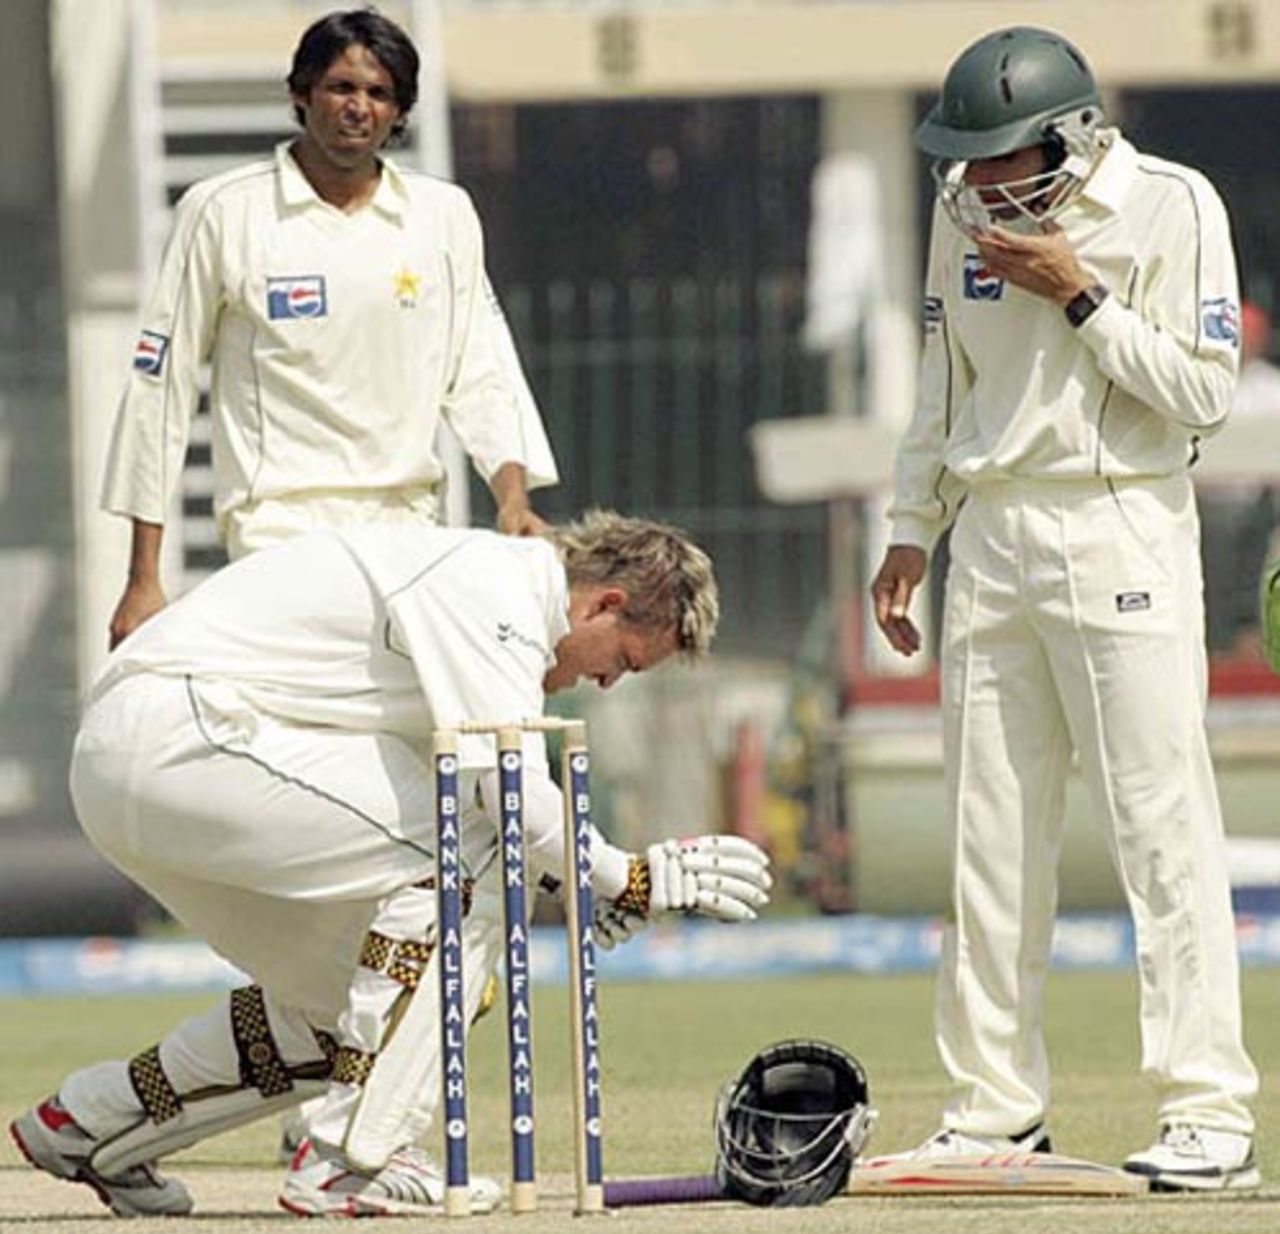 Mohammad Asif and Misbah-ul-Haq watch as Paul Harris gets up after been hit on the head, Pakistan v South Africa, 2nd Test, Lahore, 2nd day, 